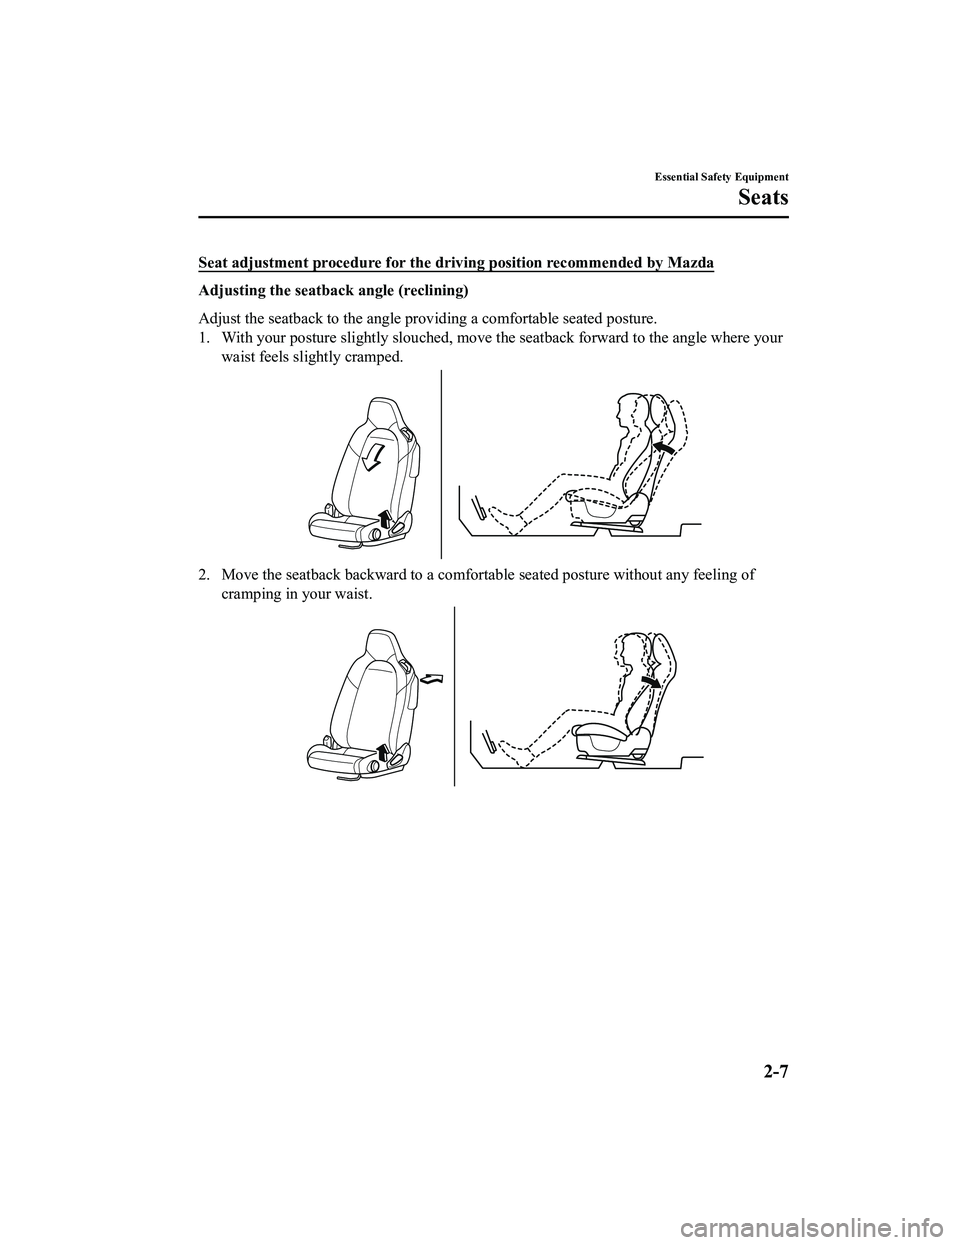 MAZDA MODEL MX-5 MIATA RF 2020 Owners Manual Seat adjustment procedure for the driving position recommended by Mazda
Adjusting the seatback angle (reclining)
Adjust the seatback to the angle providing a comfortable seated posture.
1. With your p